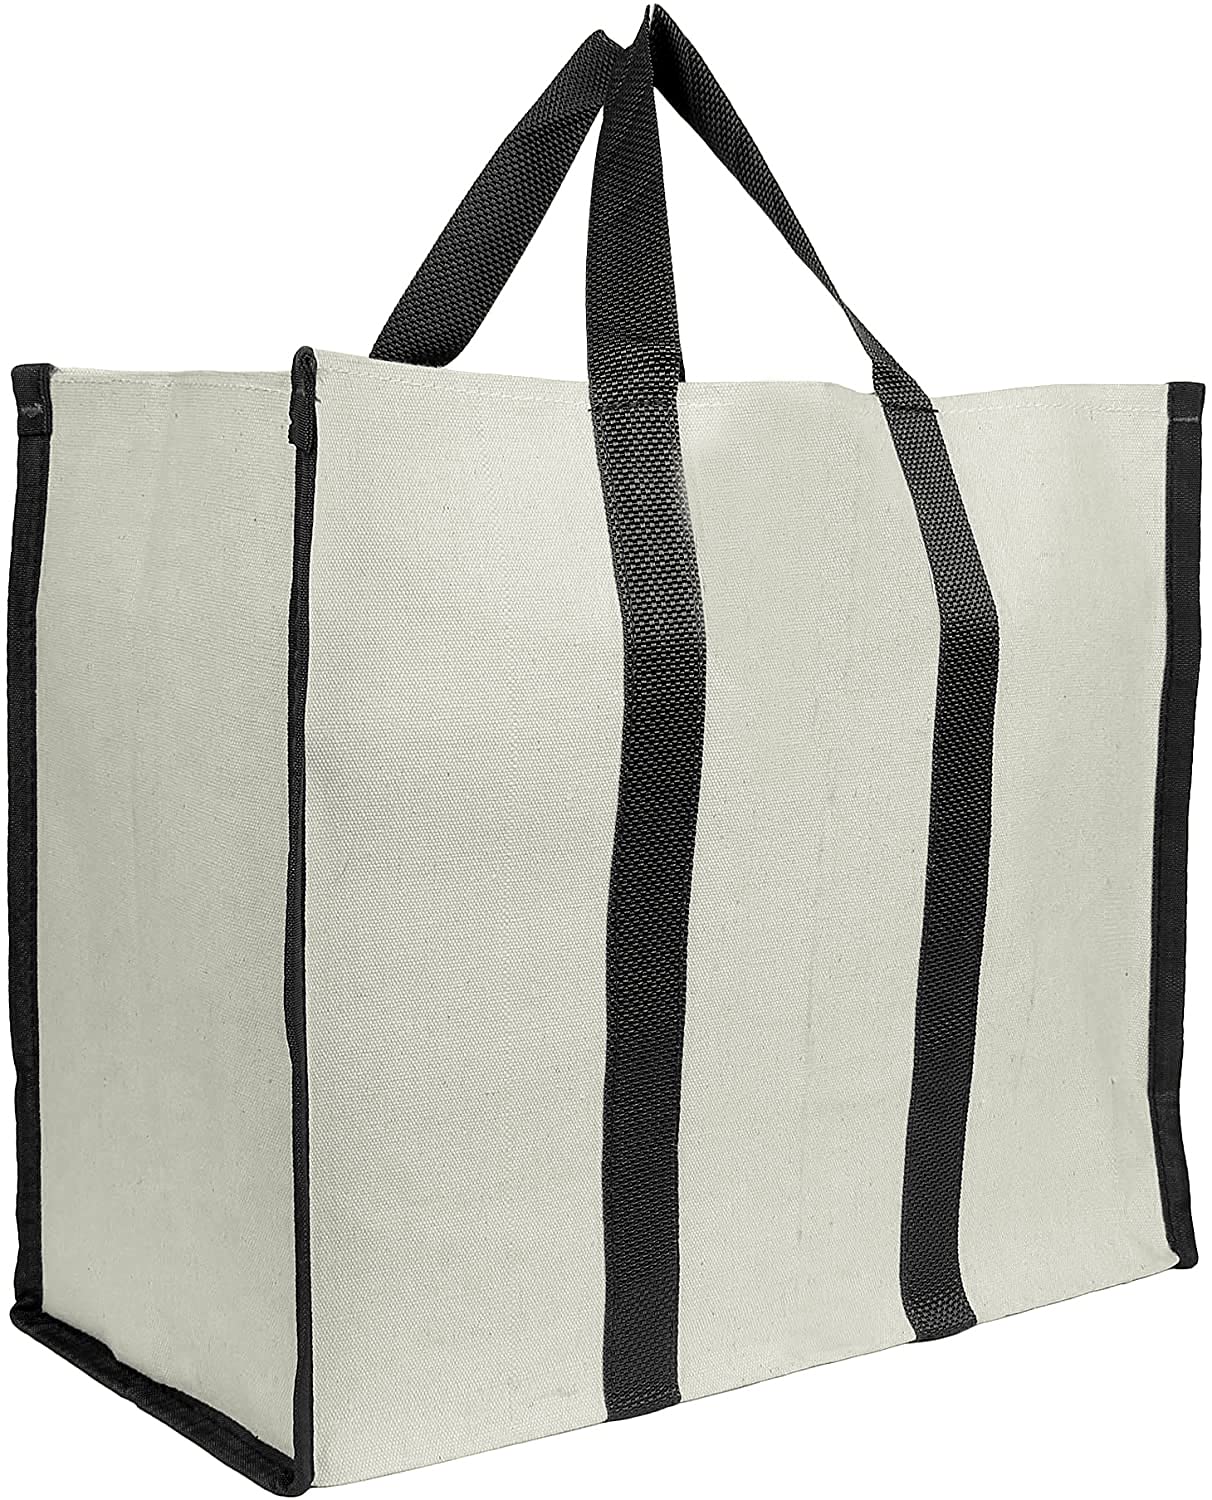 Kuber Industries Canvas Foldable Shopping Bag for Ladies|Travel Tote Bag|Grocery Bag For Daily Use (Cream & Black)